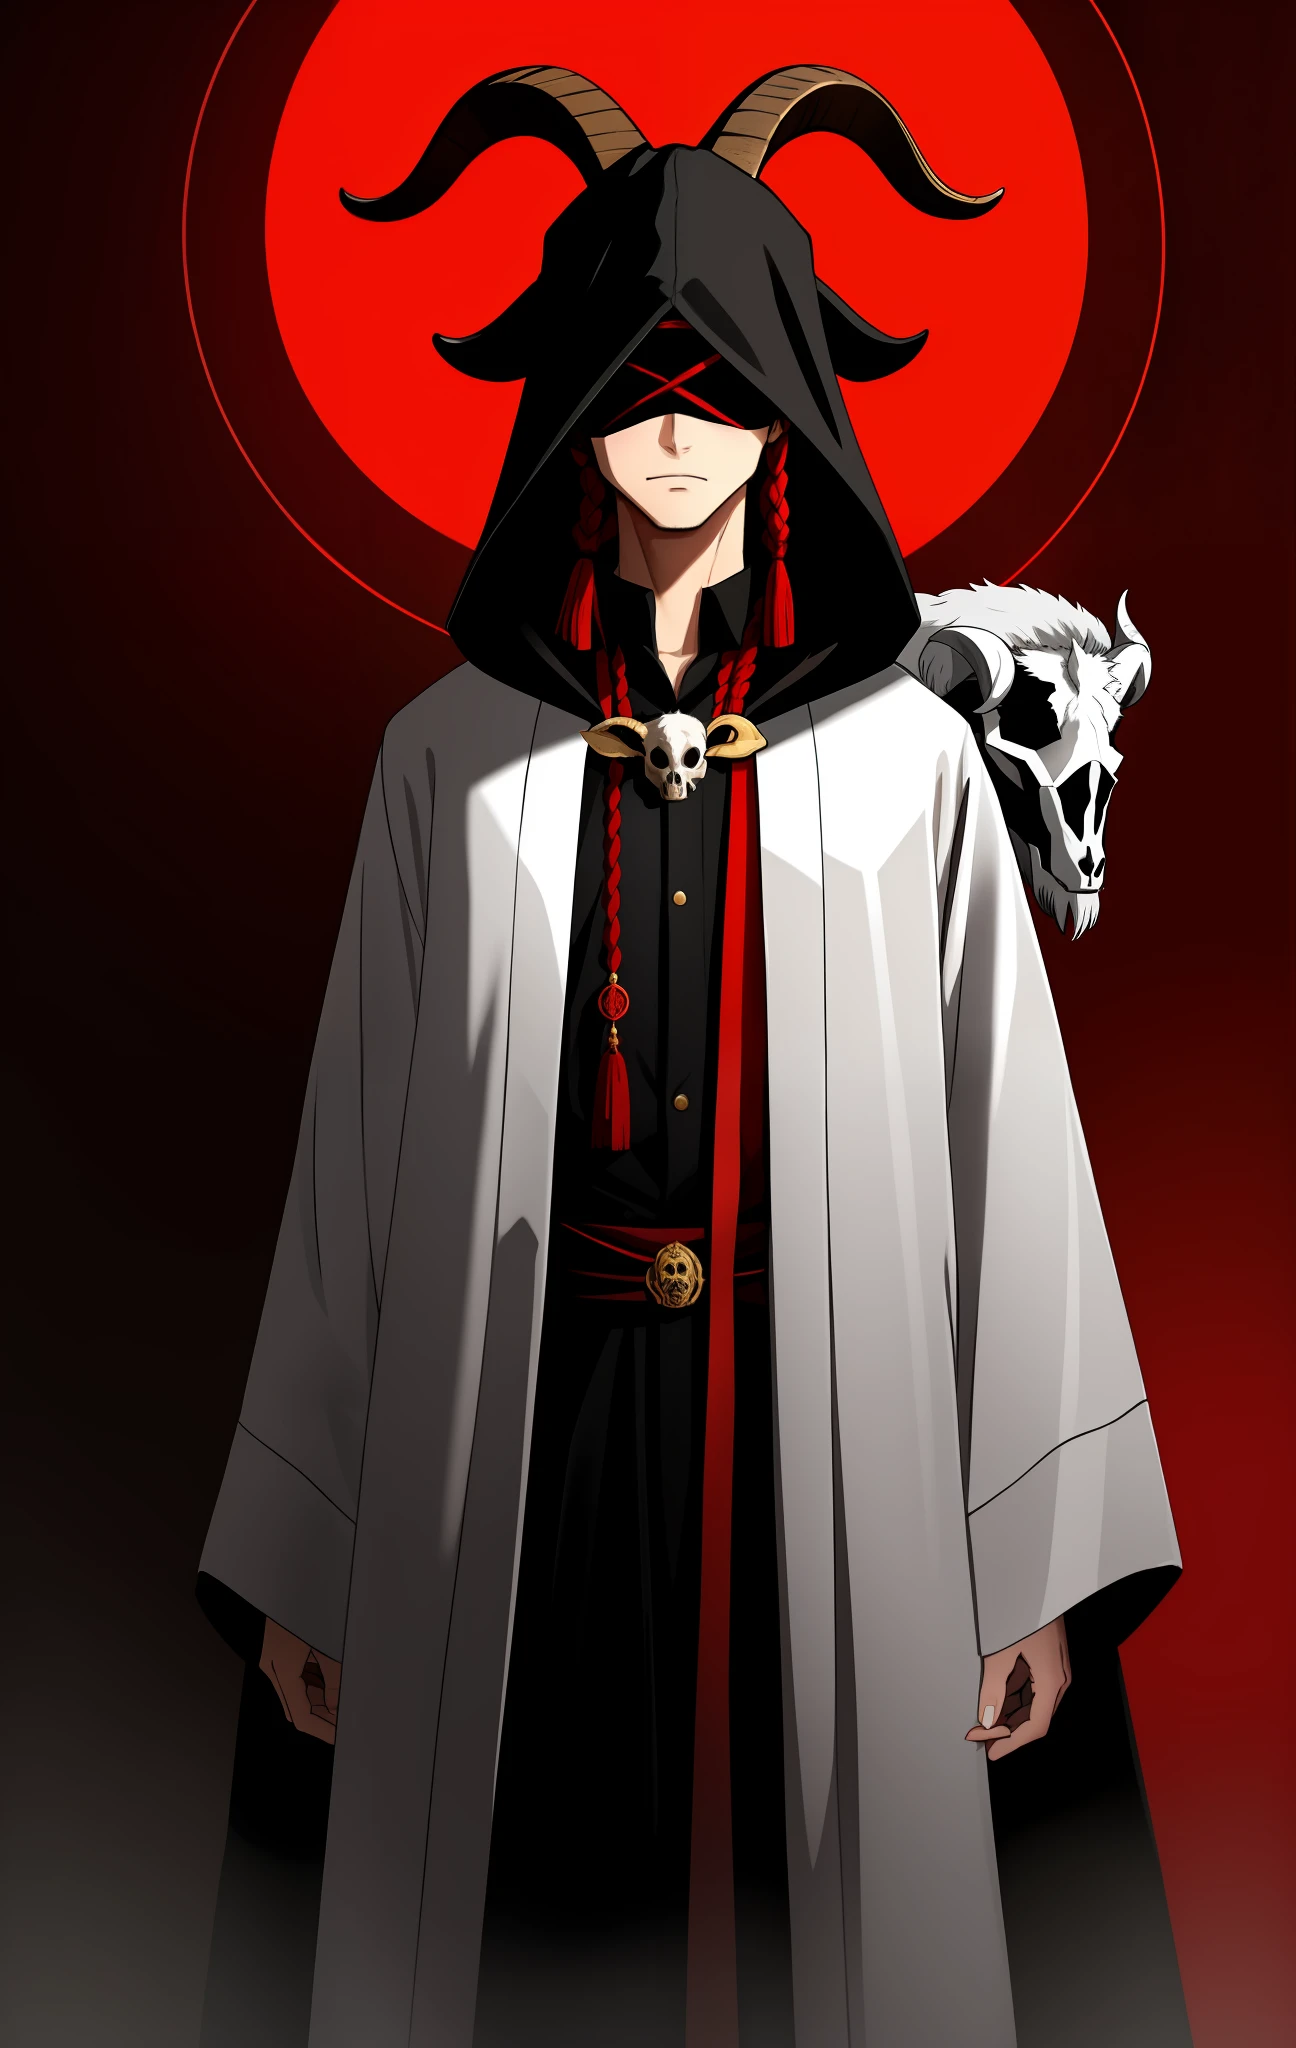 Young man with a blindfold covering his eyes, wearing a goat skull on his head, wearing a ceremonial robe of red and black color, with claws, blind man, satanic aura, holding a goat skull